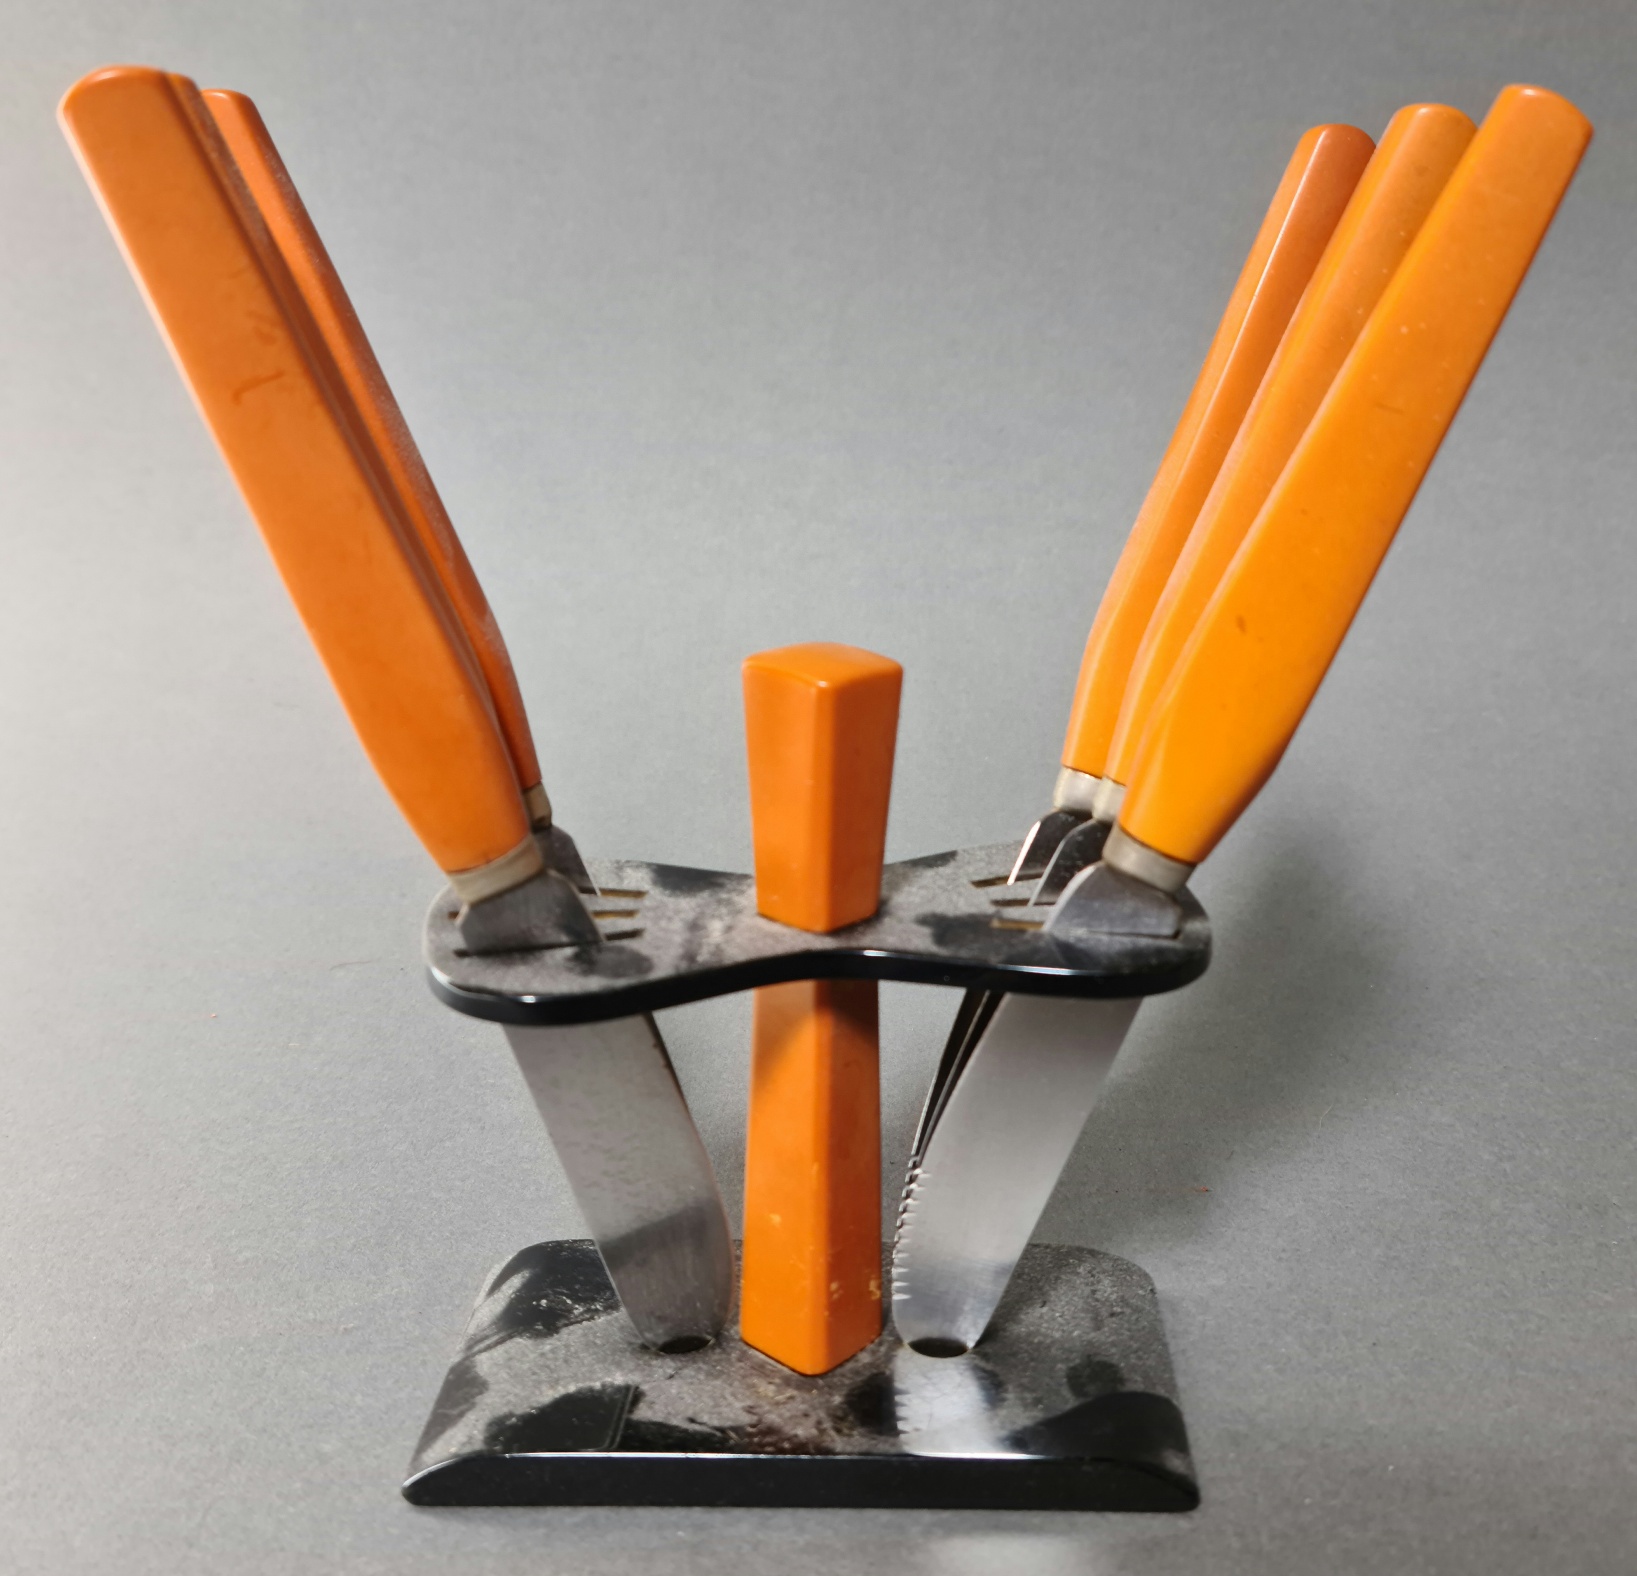 An Art Deco bakelite knife stand with a set of six orange bakelite handled knives, the serrated